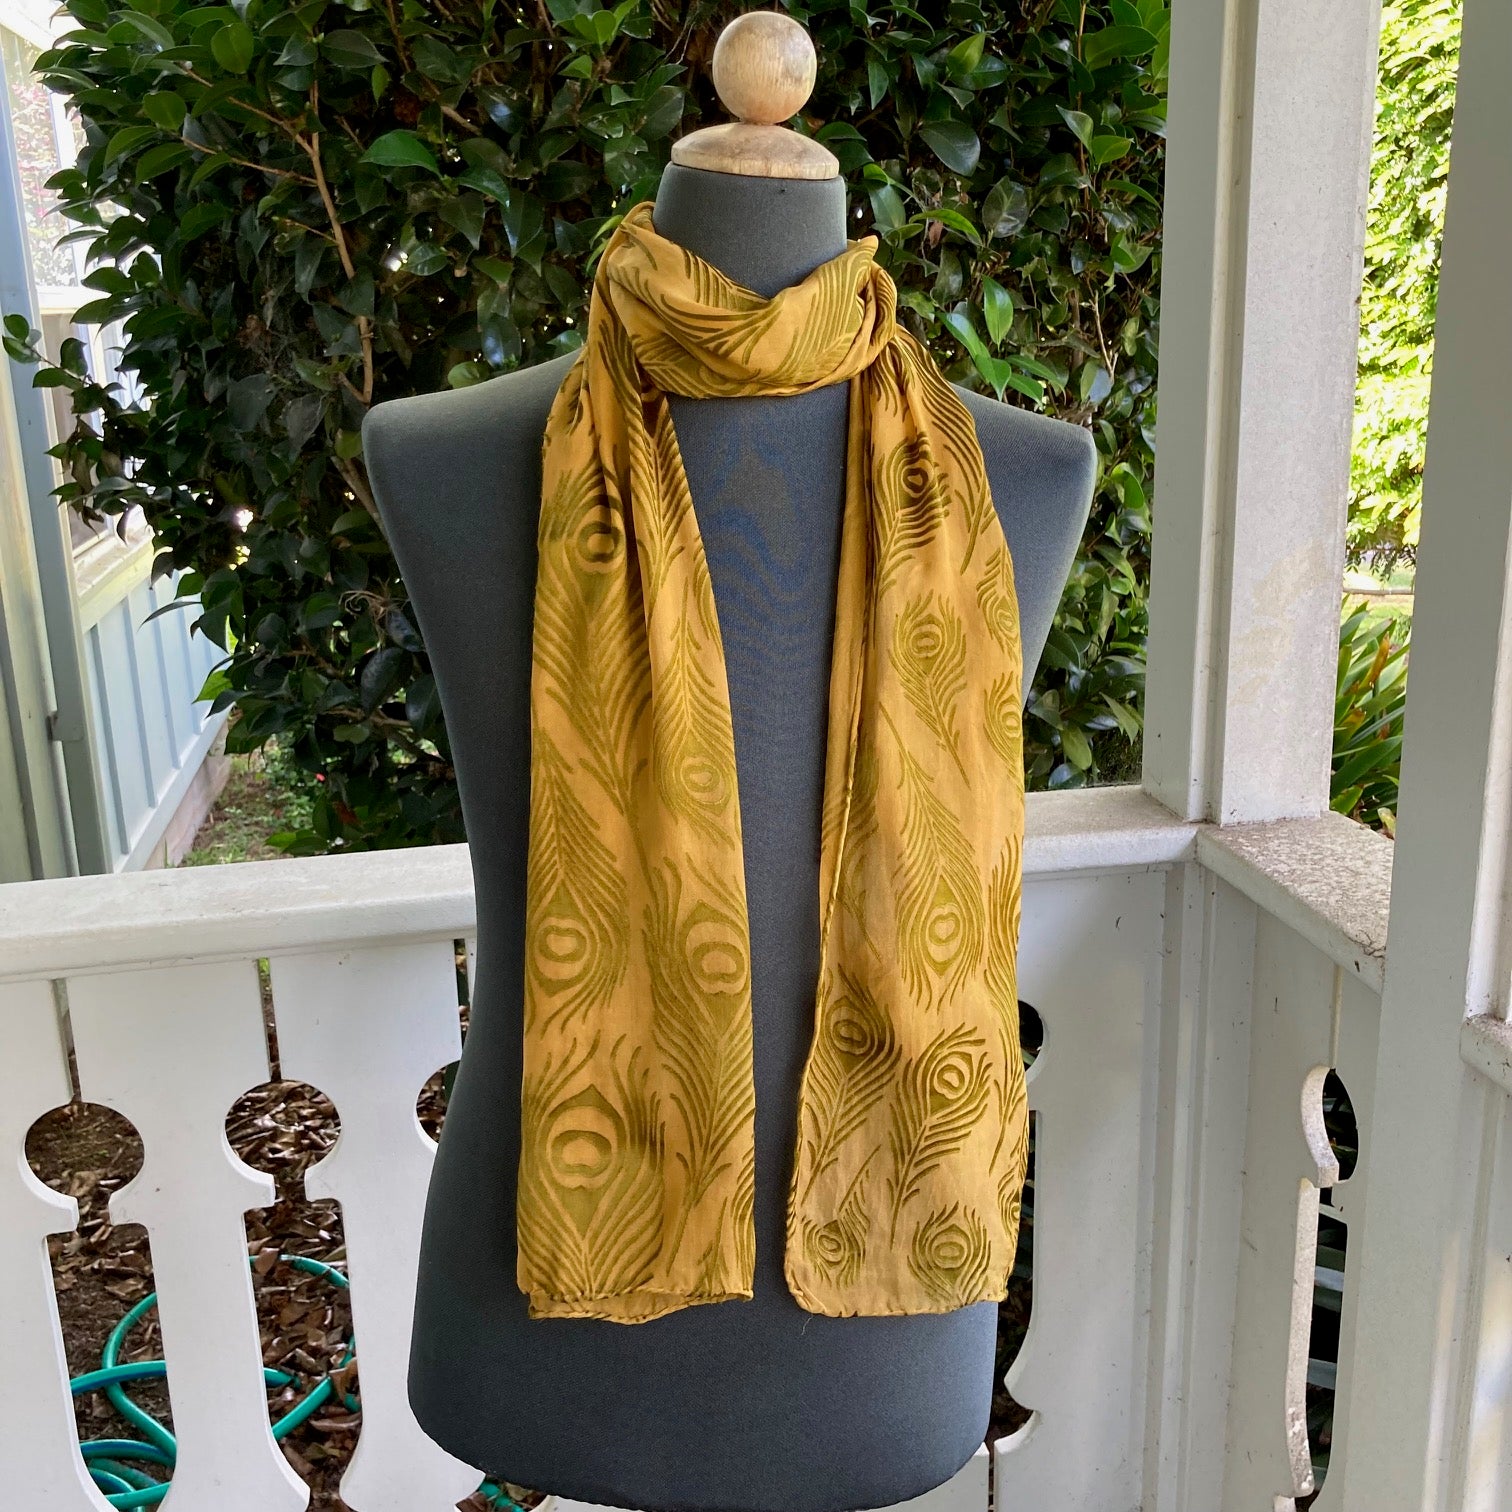 Devore Silk & Rayon Scarf in Moss and Gold in a Peacockk Design